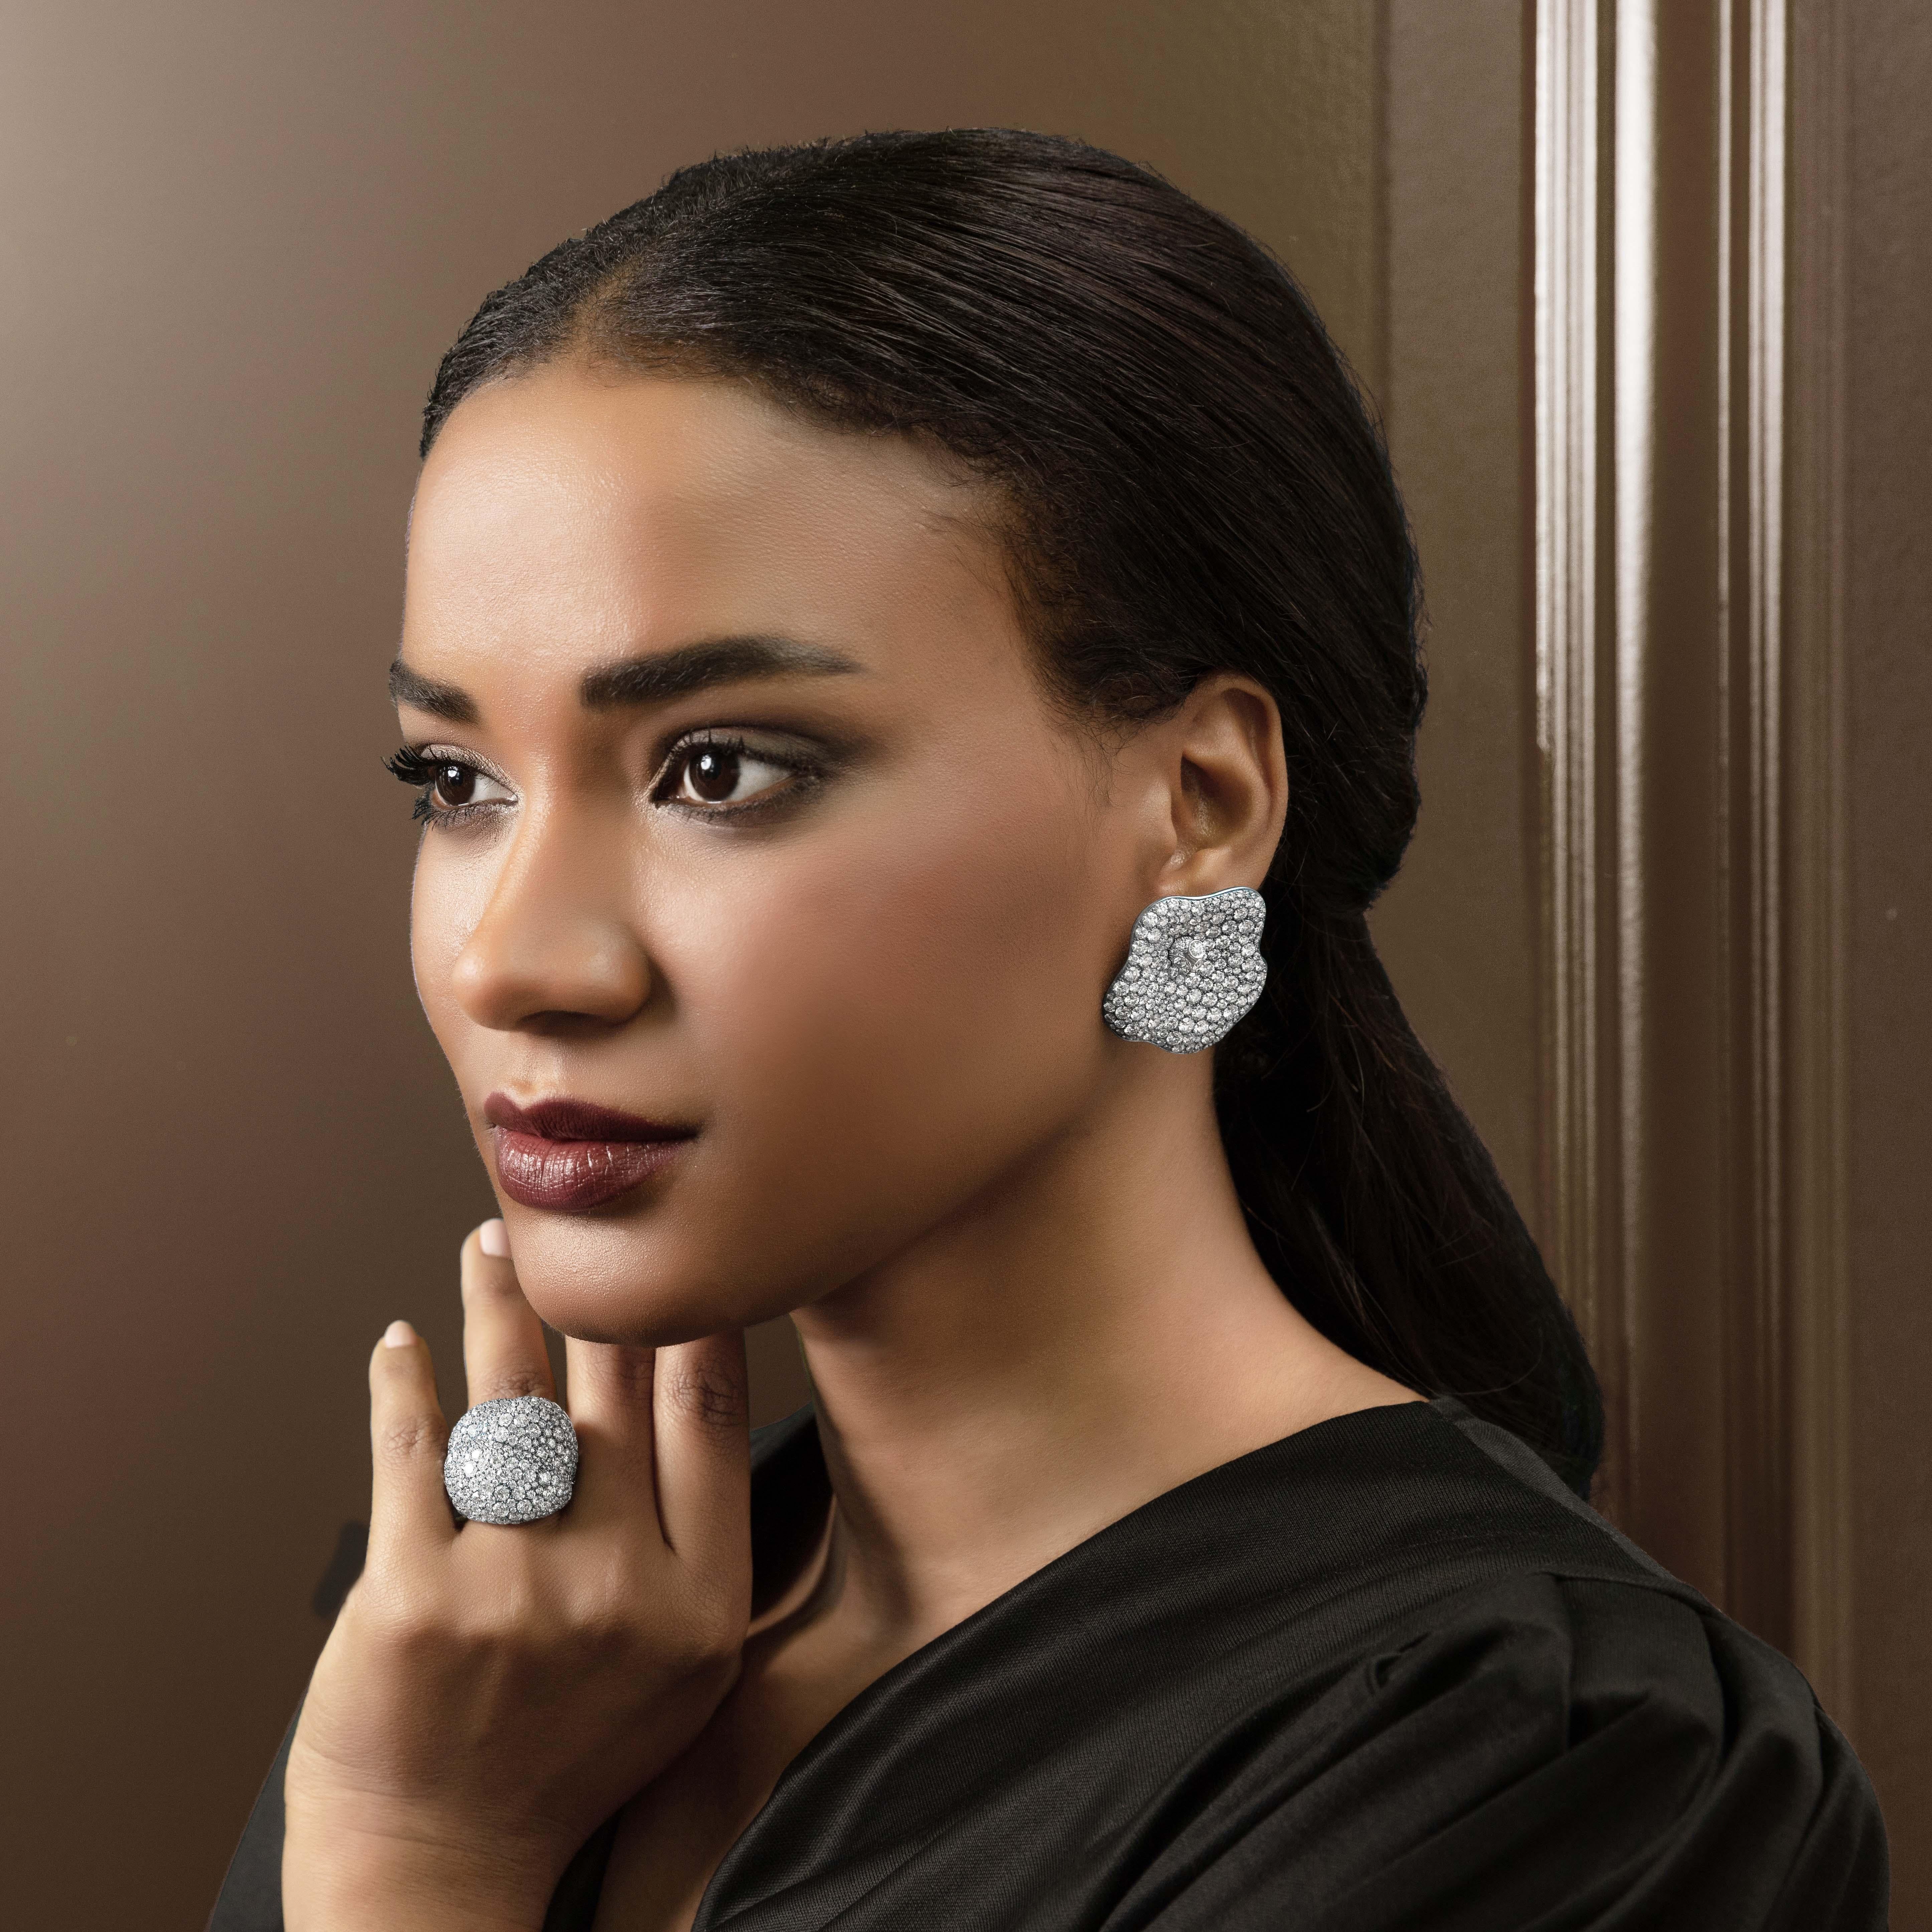 These earrings are part of Kilimanjaro Collection.

Exquisitely made and reminiscent of the tender snow falling on Africa’s highest mountain. A place of mystical beauty and fearlessness, Mount Kilimanjaro’s snow tops, serve as a muse to this